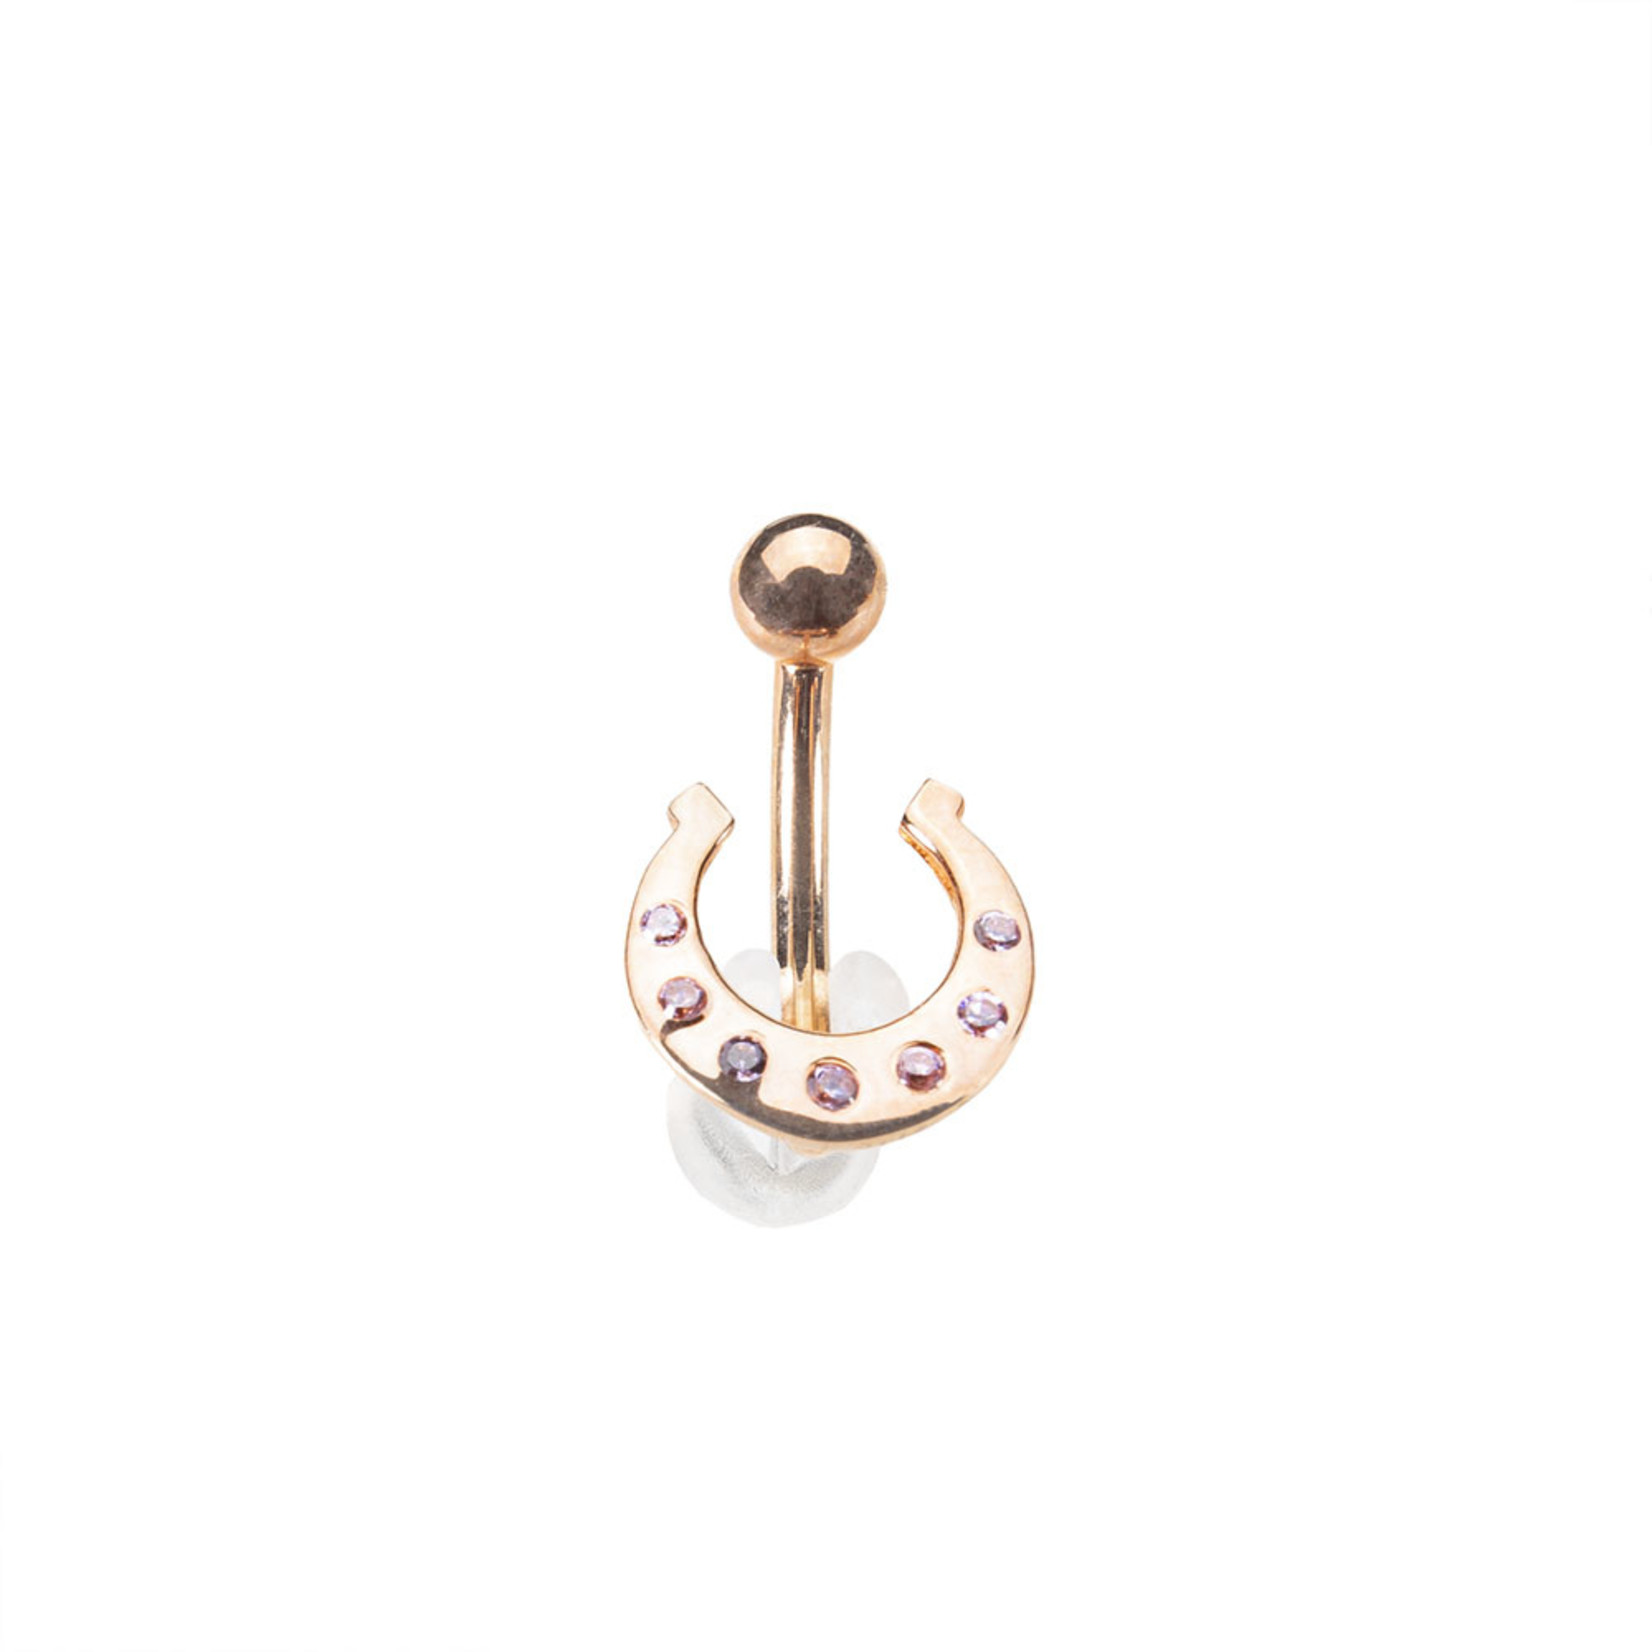 BVLA 14g 7/16 rose gold horseshoe with pink CZ j-curve